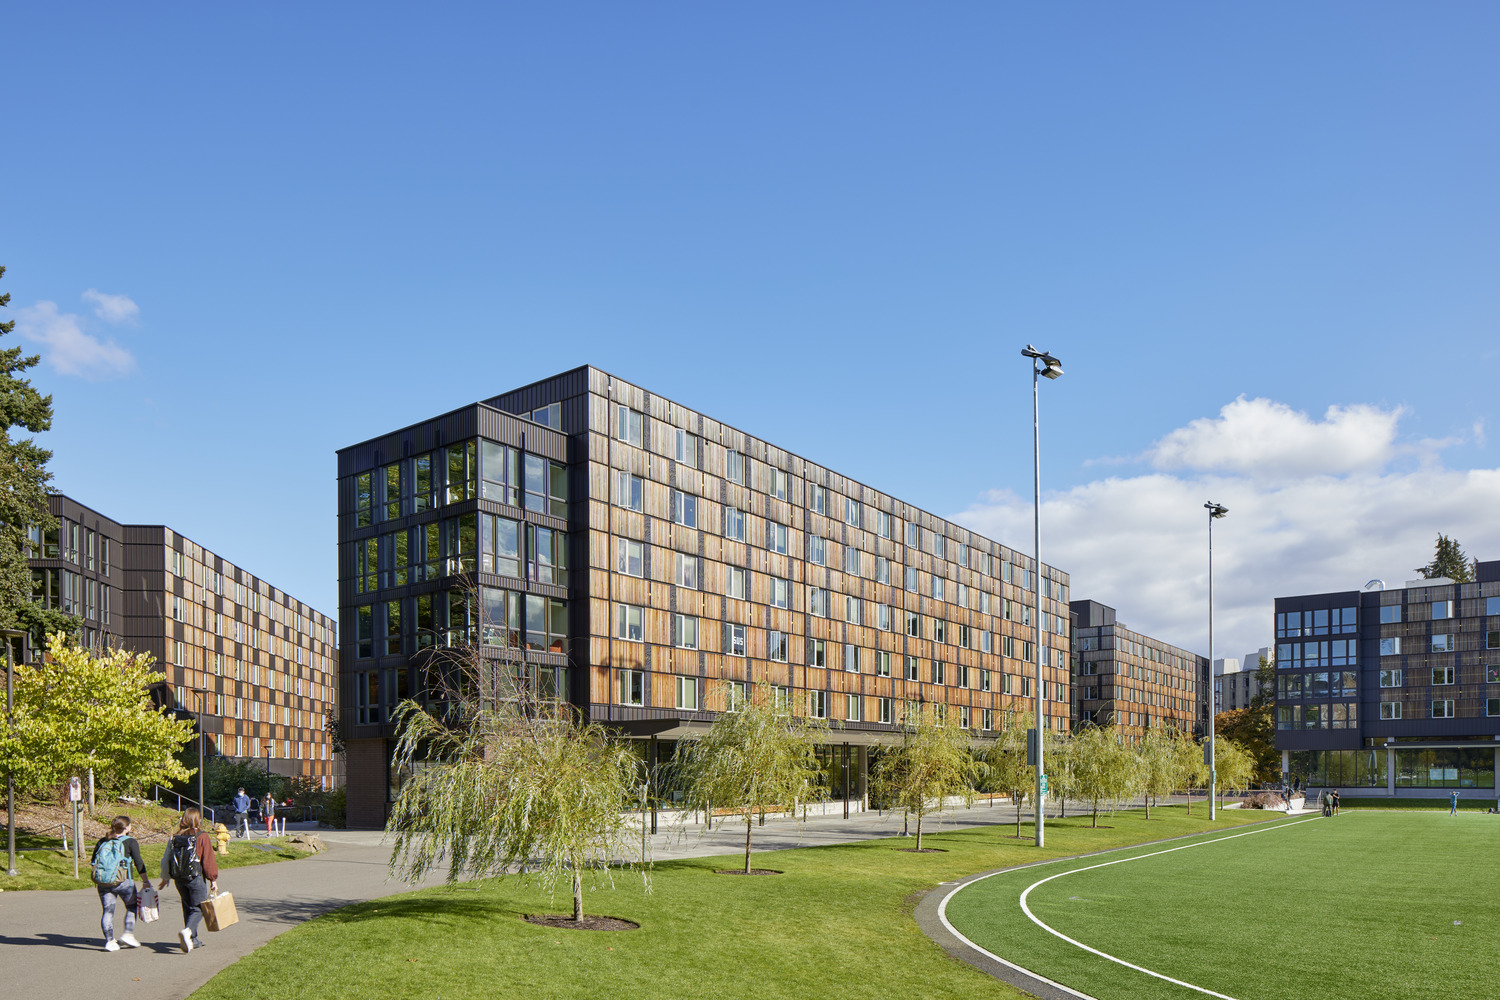 <p>The neighborhood extends an historic campus fabric by weaving together four buildings and accompanying landscapes on a previously isolated part of campus. | <small>&copy; Bruce Damonte</small></p>